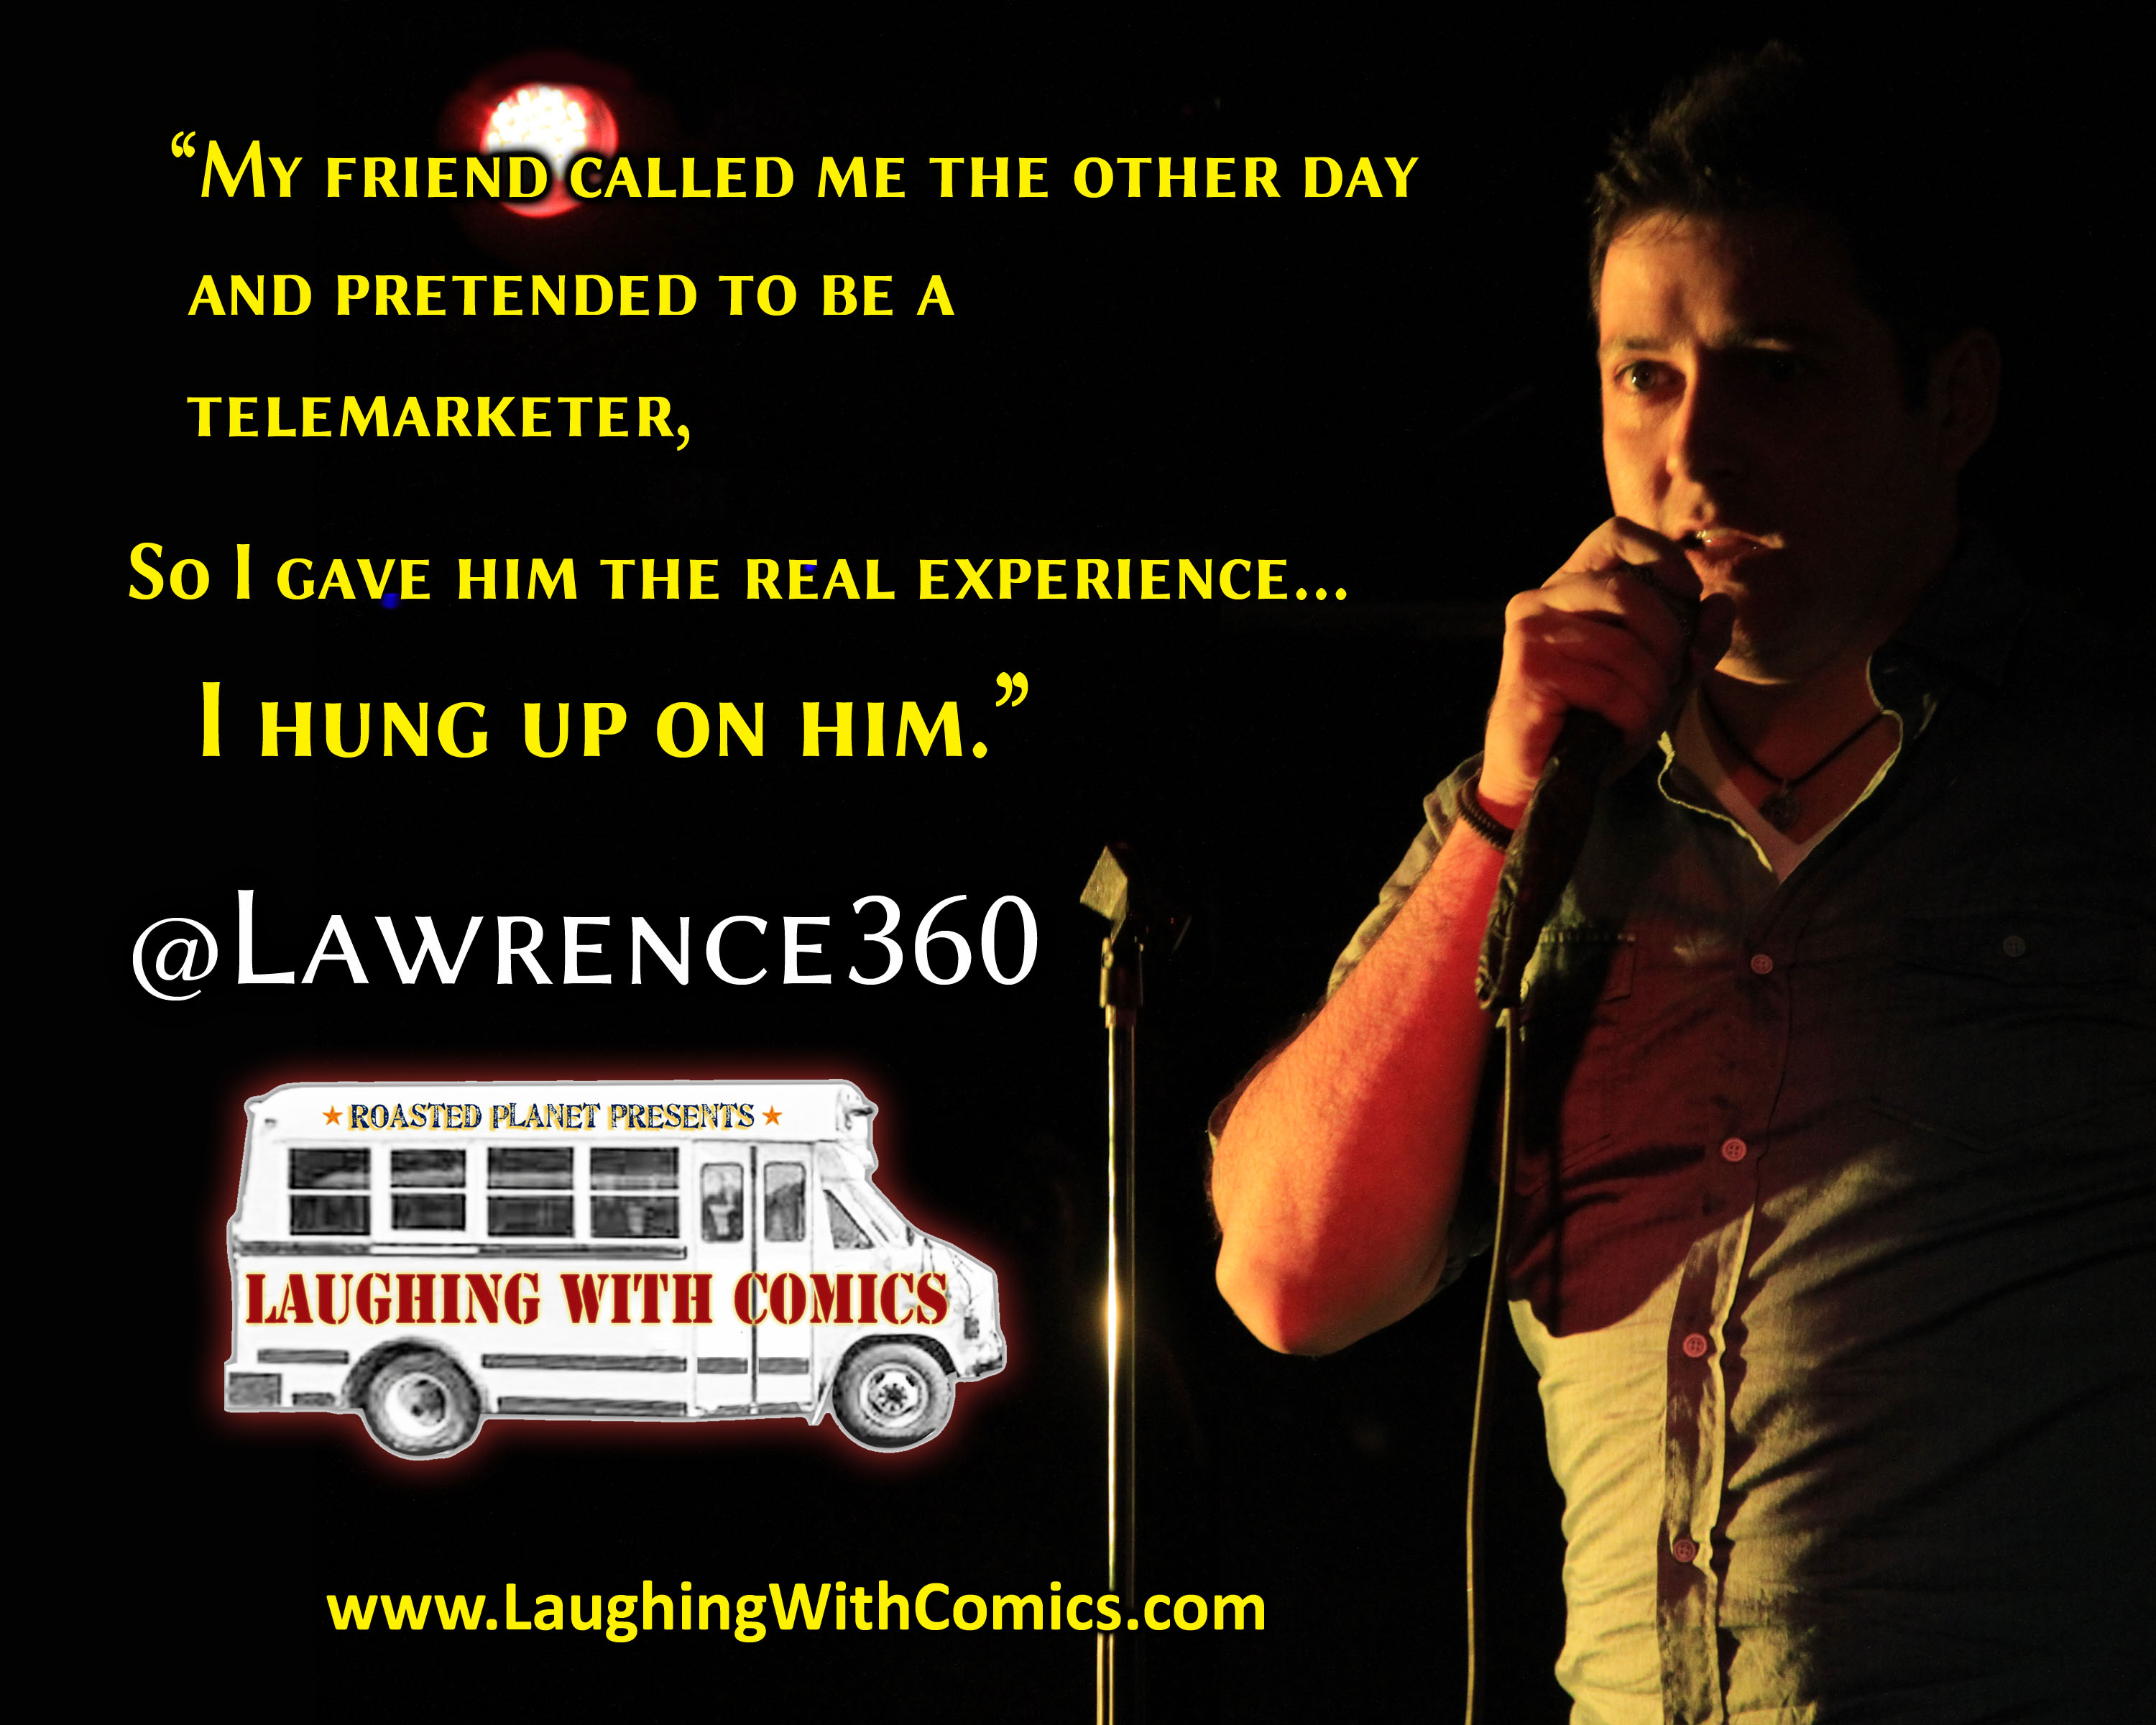 Comedian Lawrence360 of the Laughing with Comics 2014 Comedy Tour